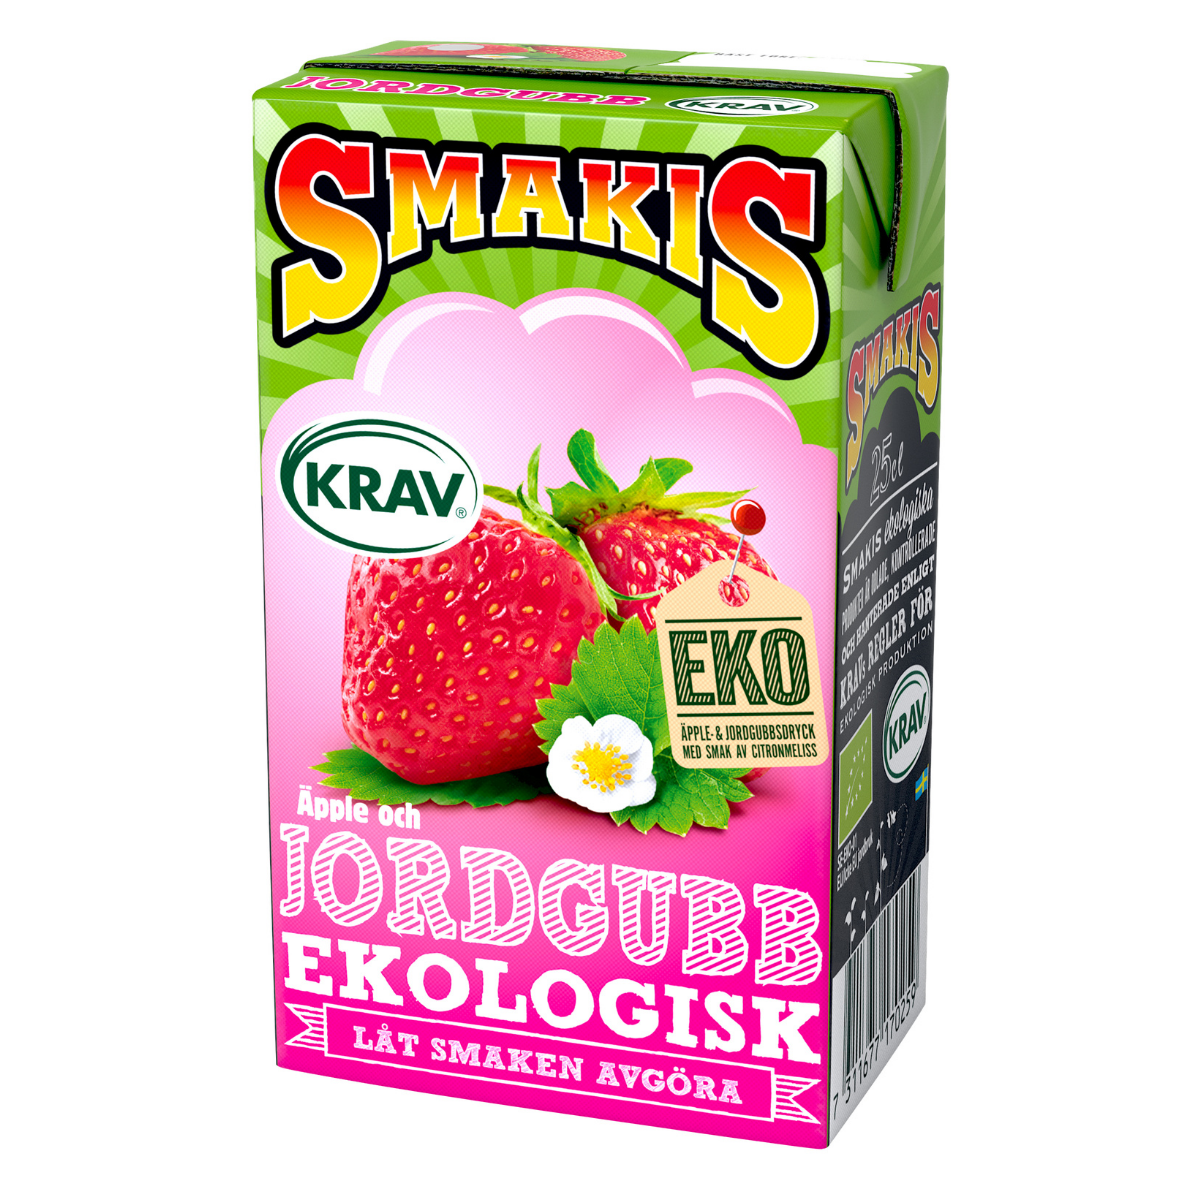 Smakis'' Strawberry drink '